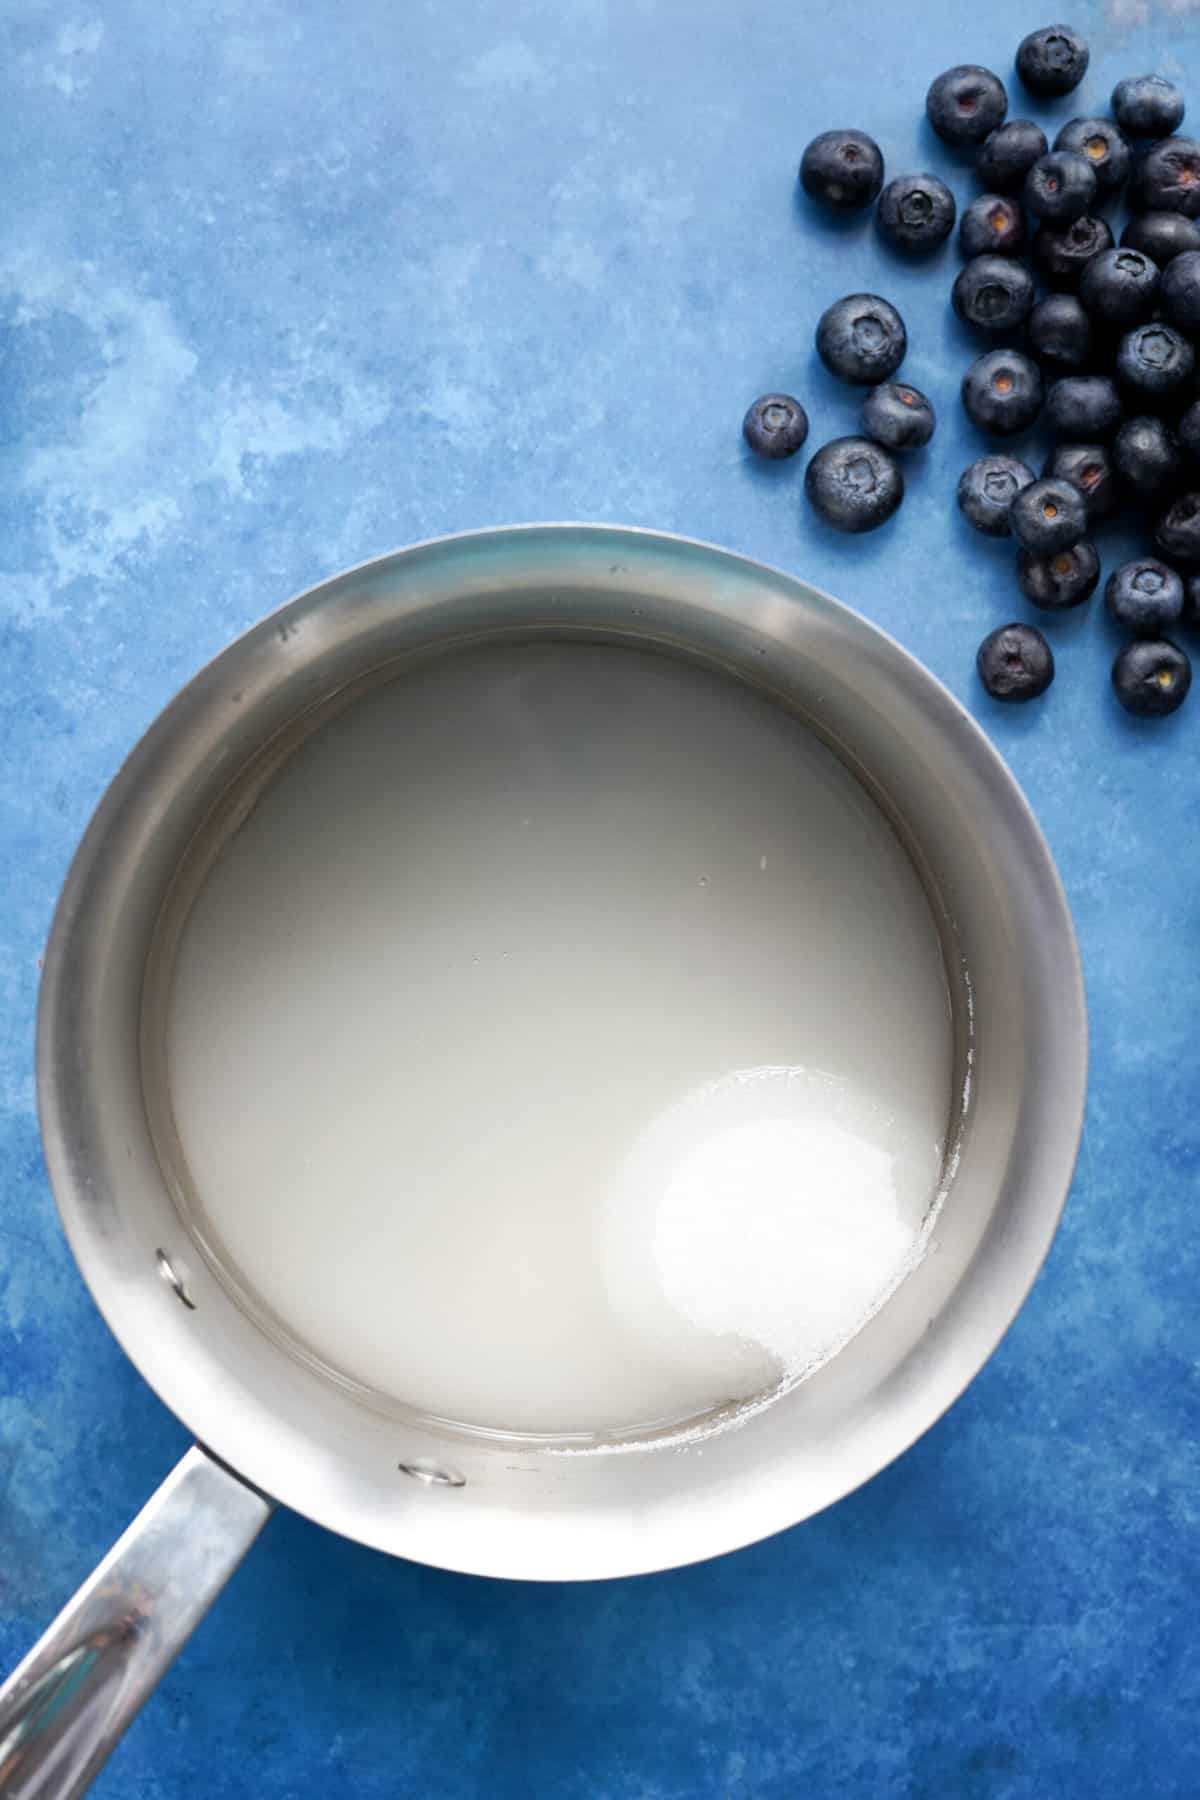 step one of making blueberry simple syrup: dissolving sugar into water in a small saucepan over medium-low heat.